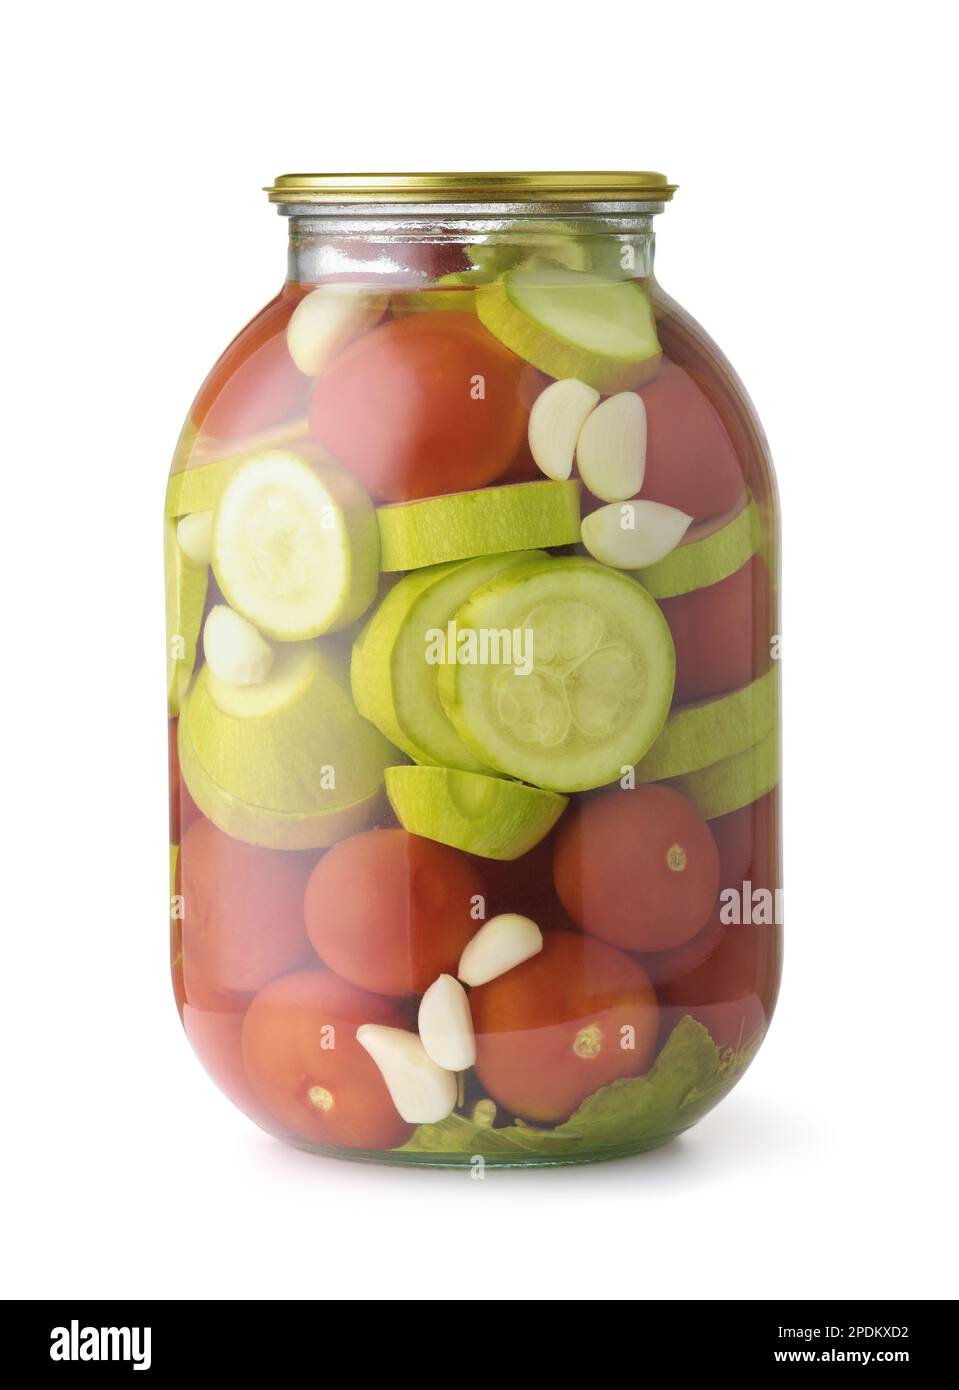 https://c8.alamy.com/comp/2PDKXD2/front-view-of-pickled-tomatoes-zucchini-and-garlic-in-glass-jar-isolated-on-white-2PDKXD2.jpg